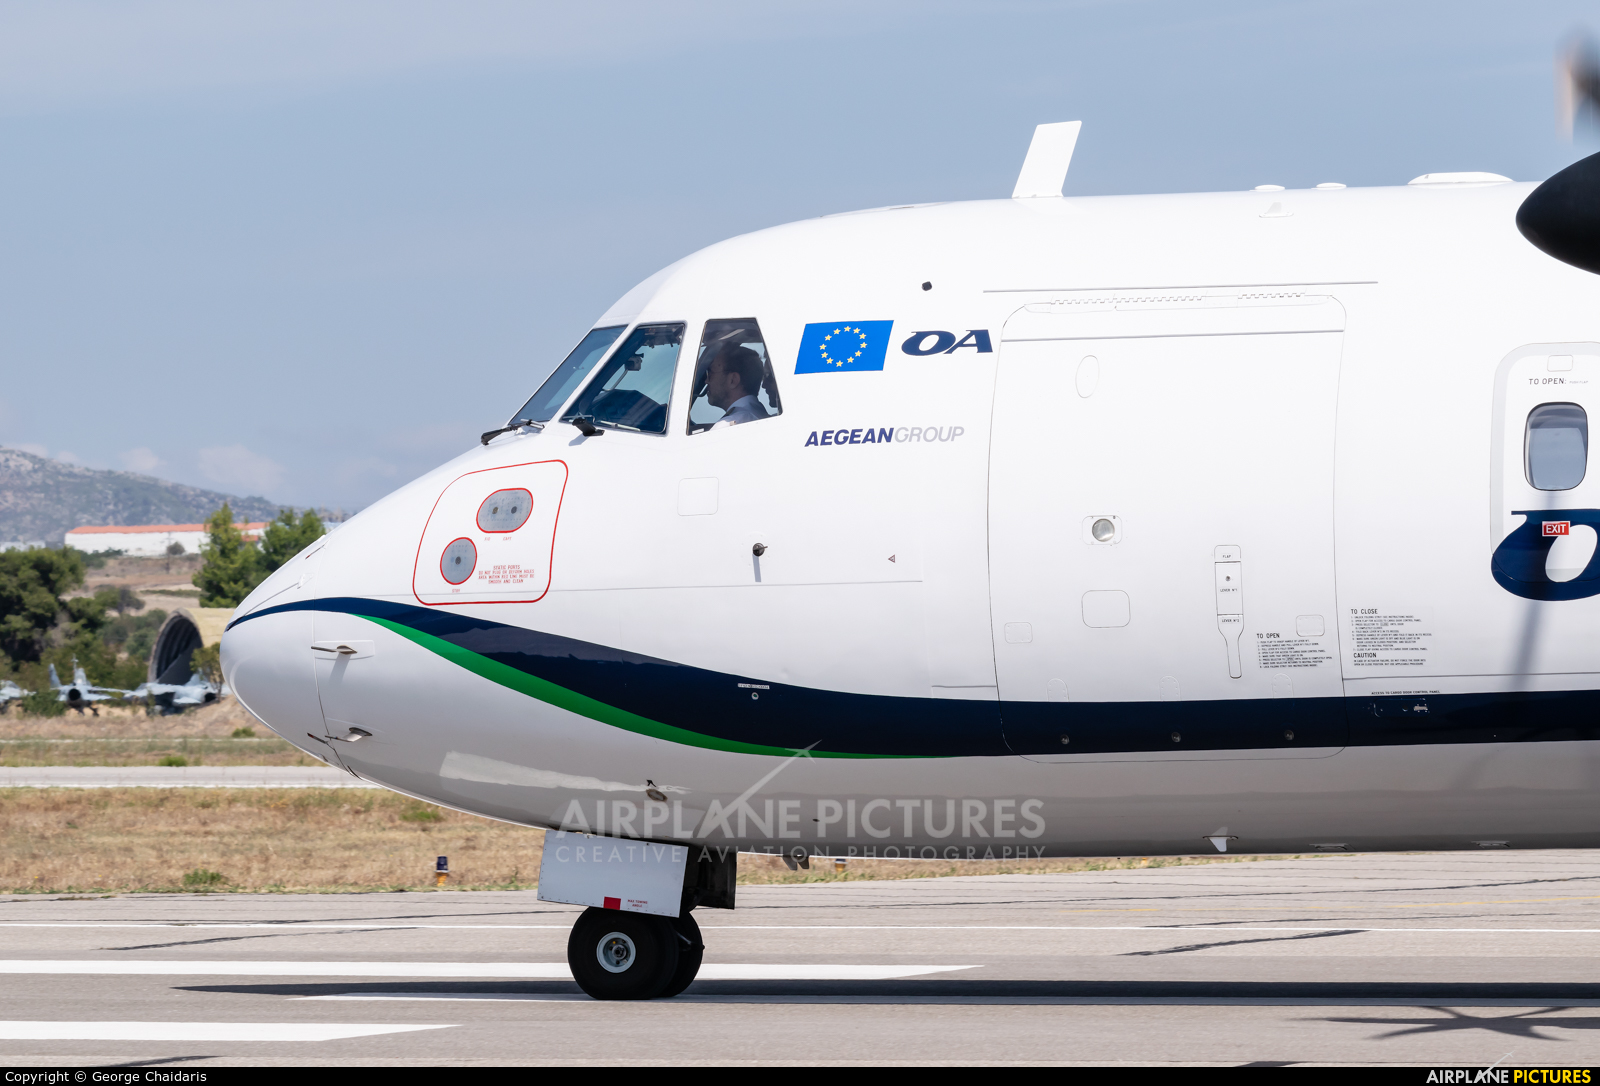 Olympic Airlines SX-OAW aircraft at Tanagra